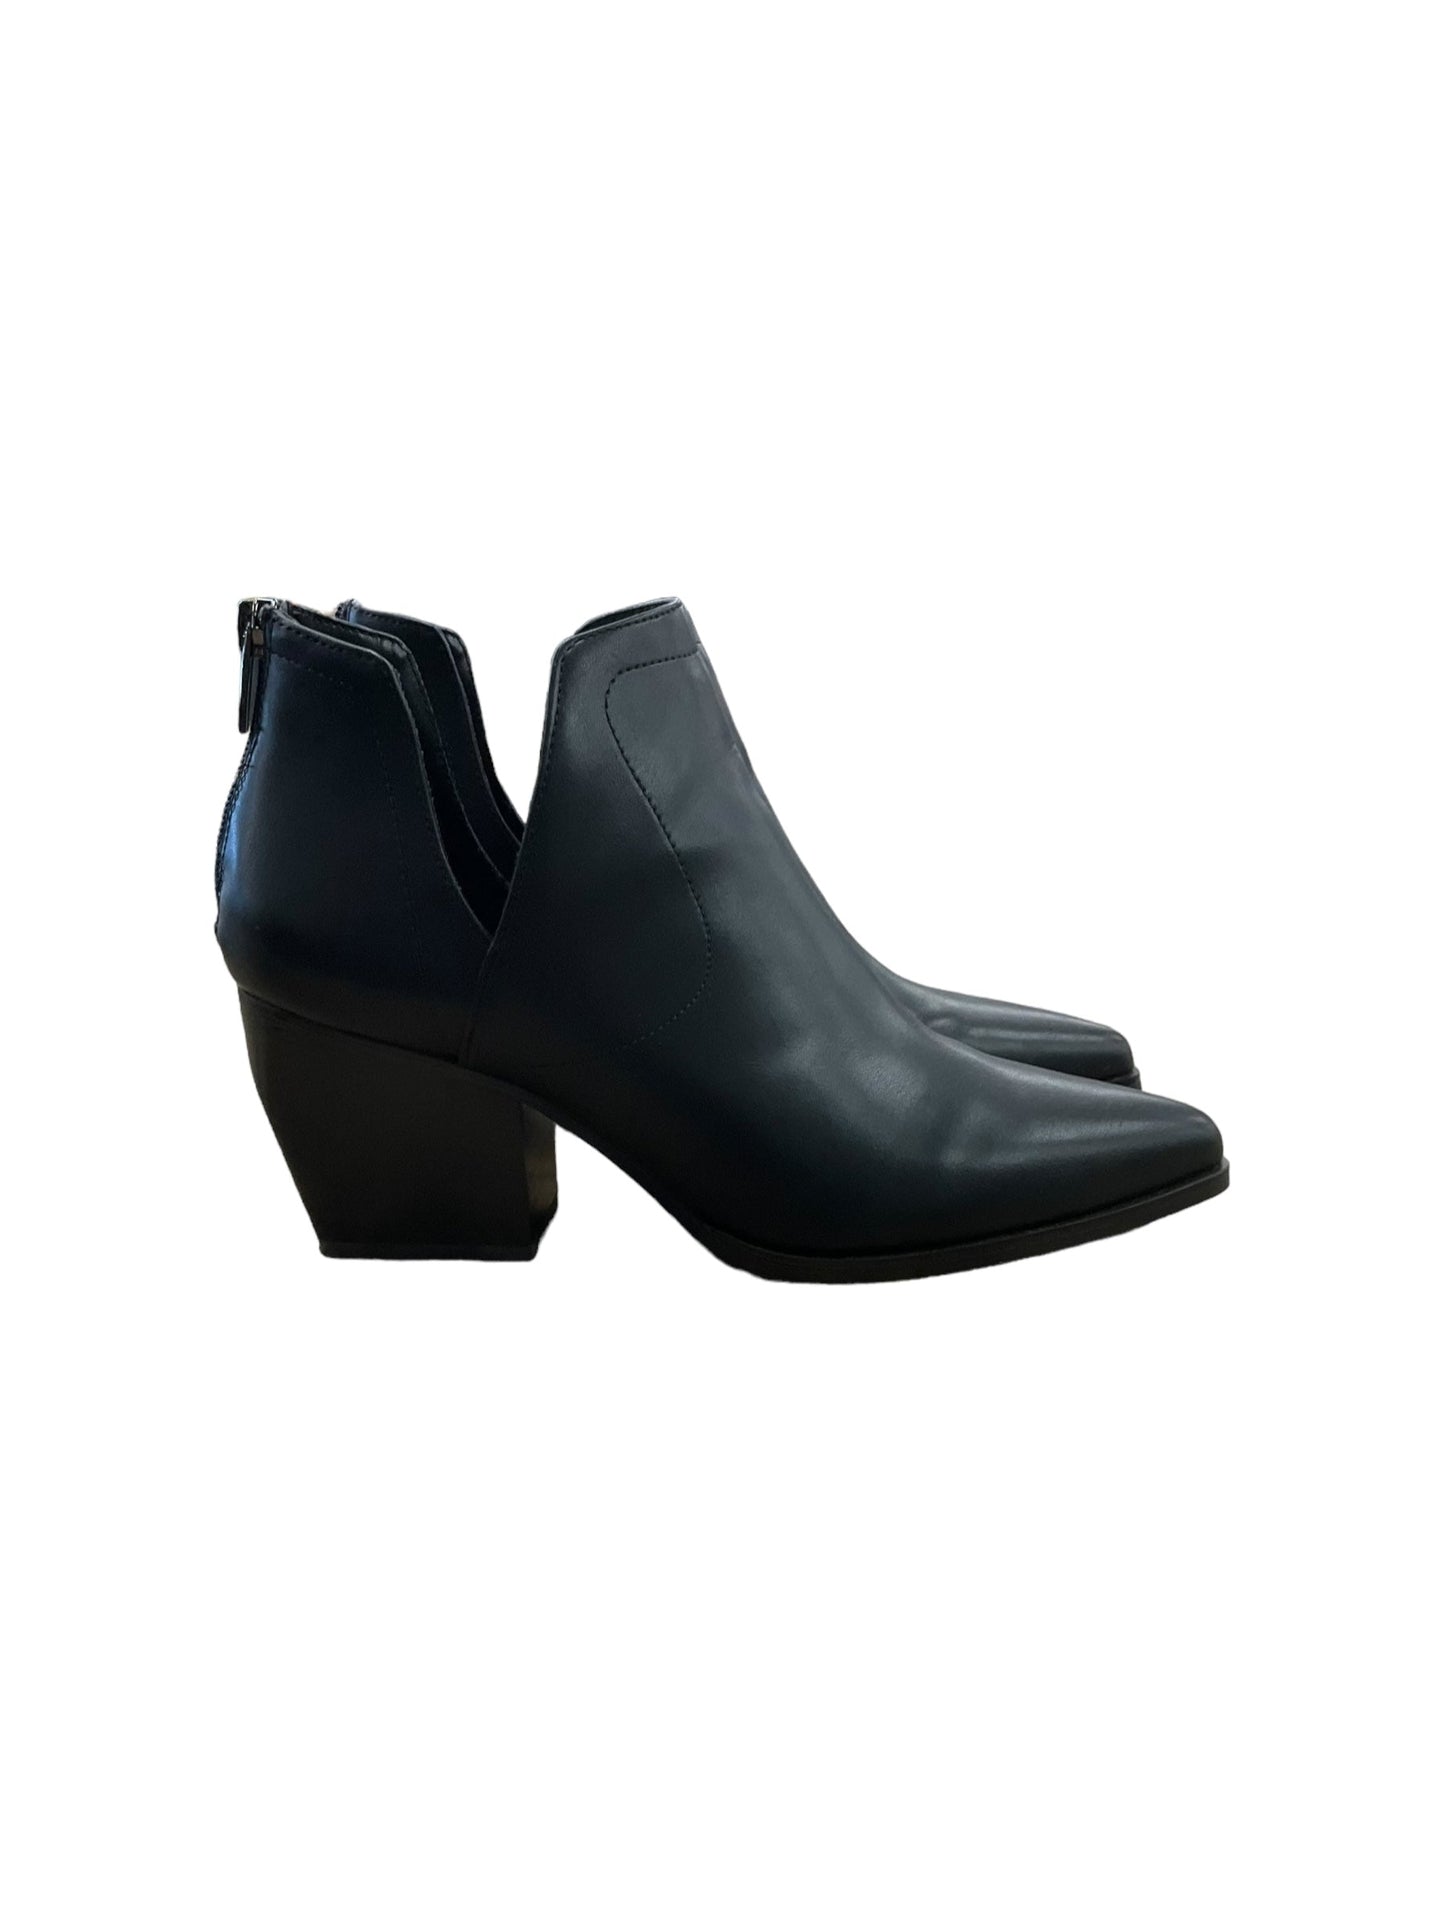 Black Boots Ankle Heels Vince Camuto, Size 10